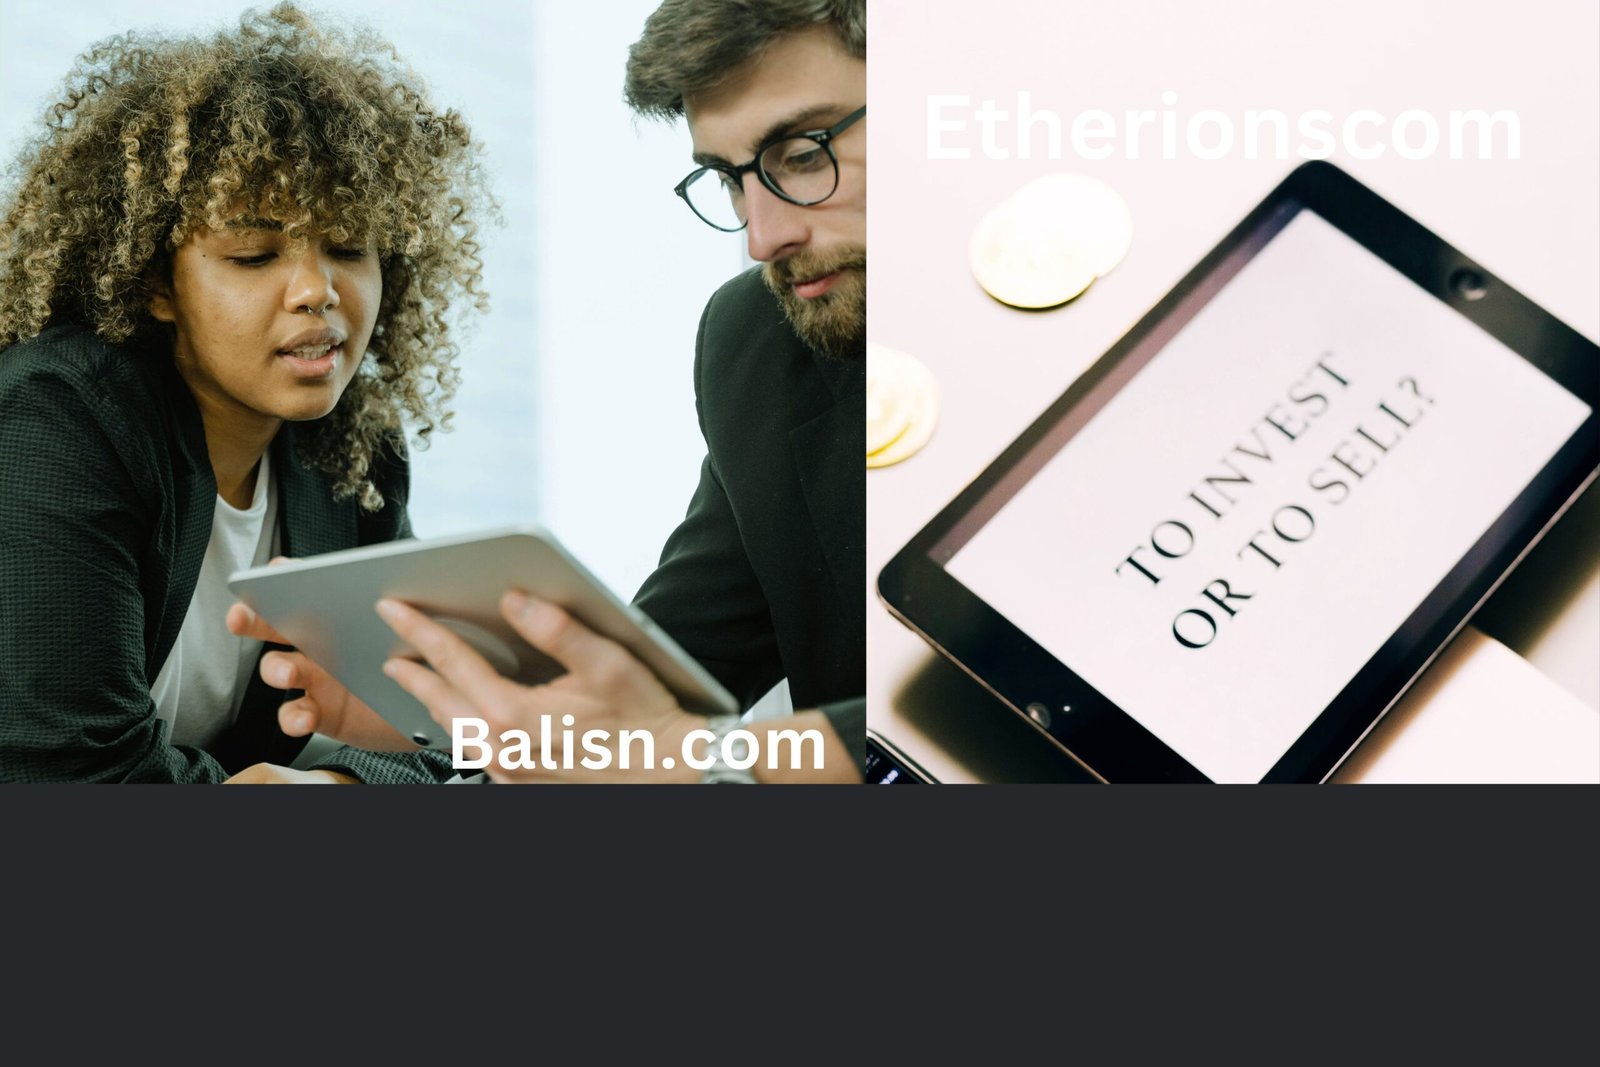 Etherionscom About